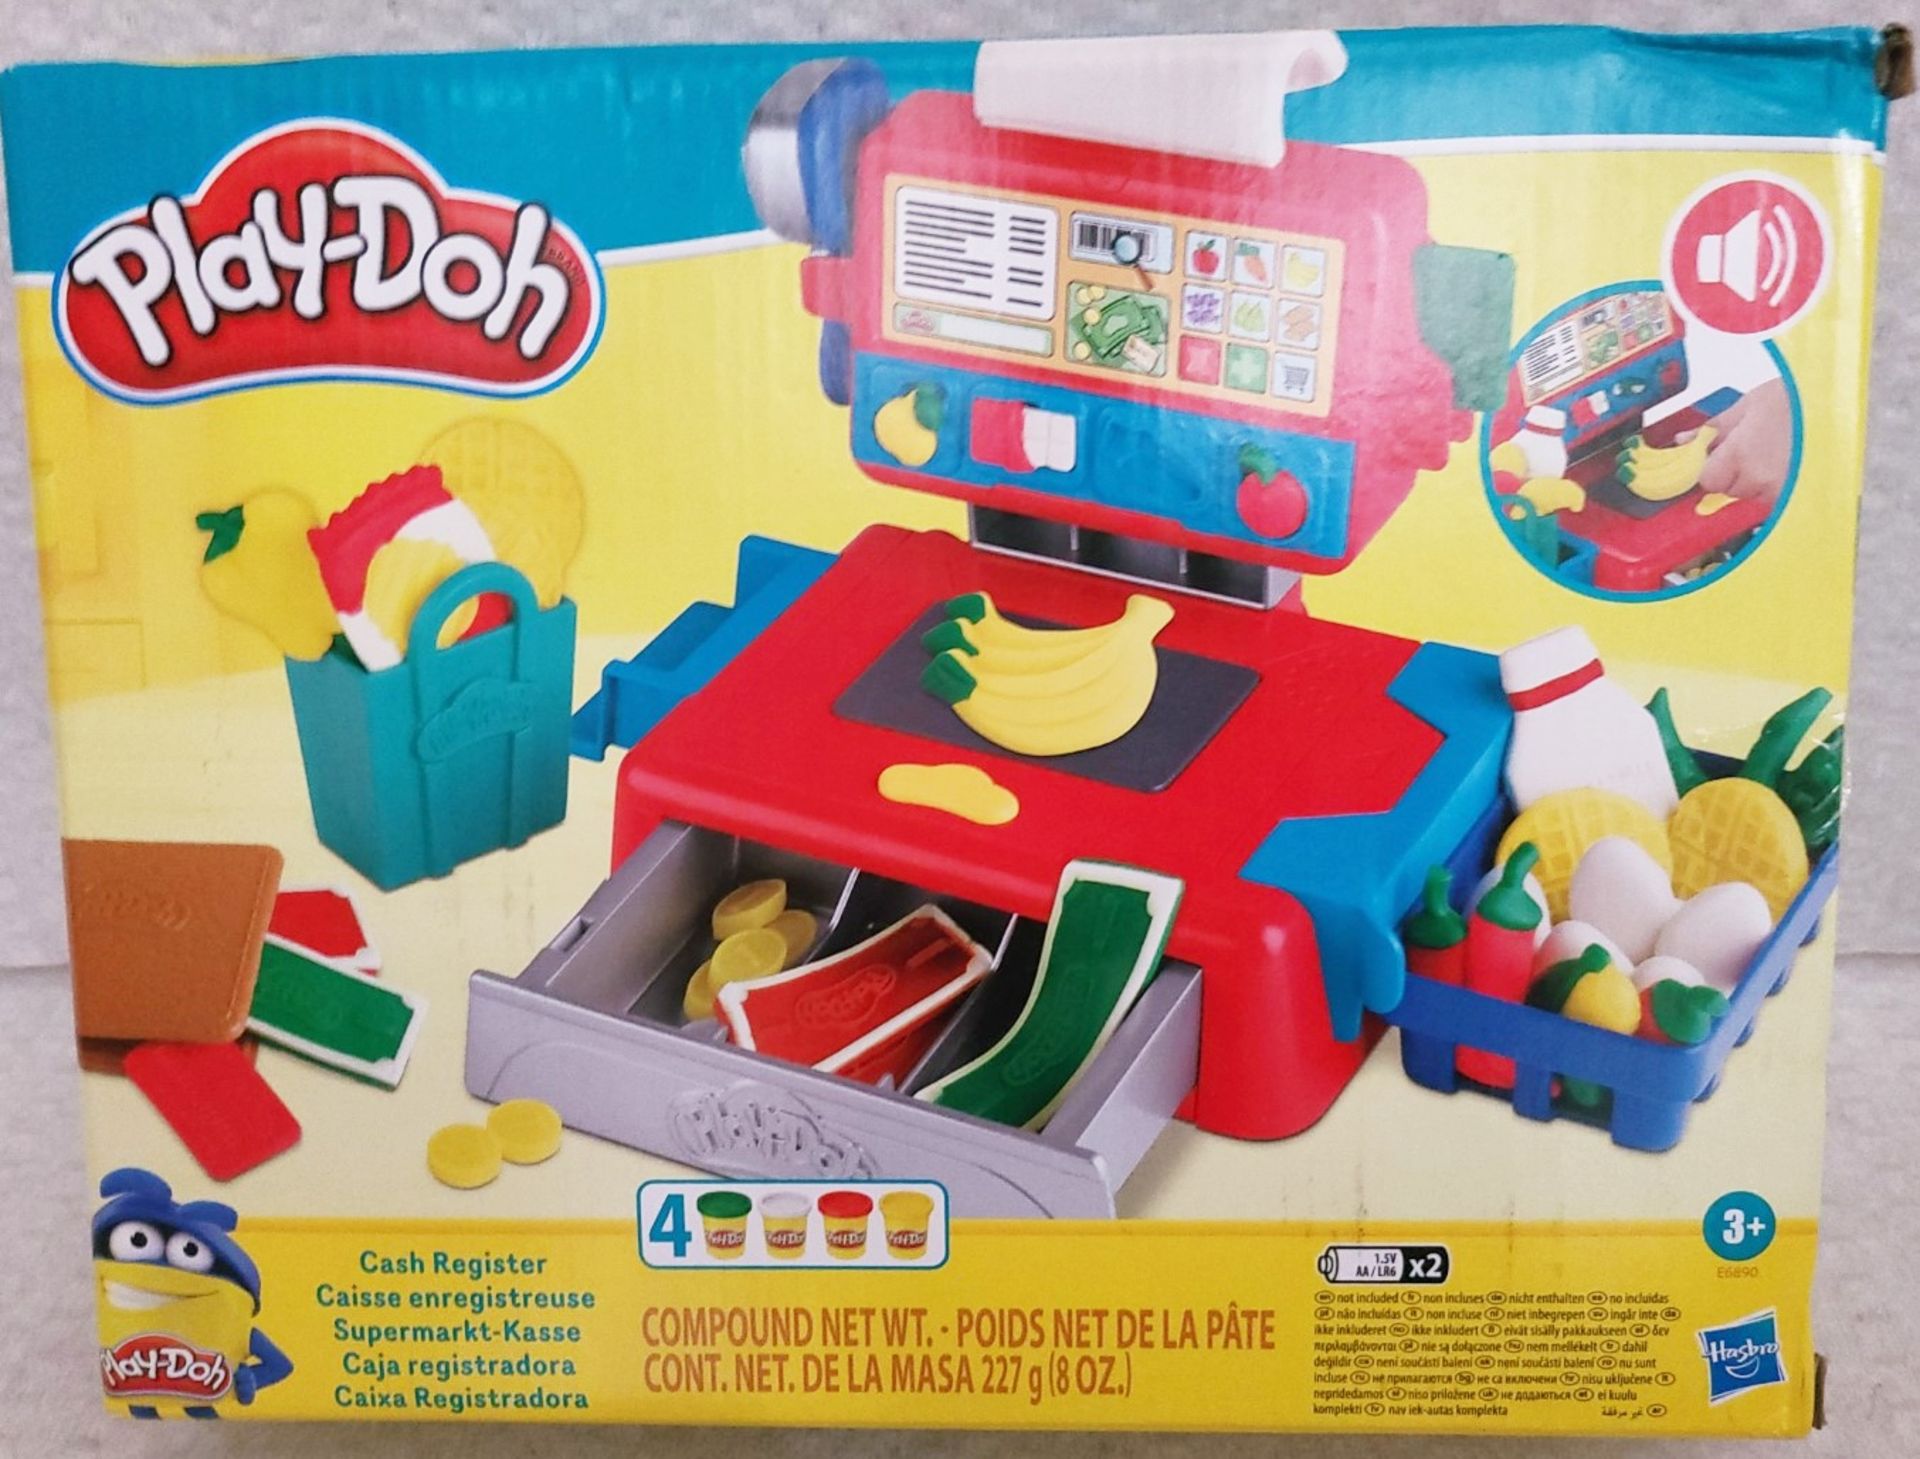 1 x PLAY DOH Cash Register E6890 - Unused Boxed Stock - Image 2 of 5